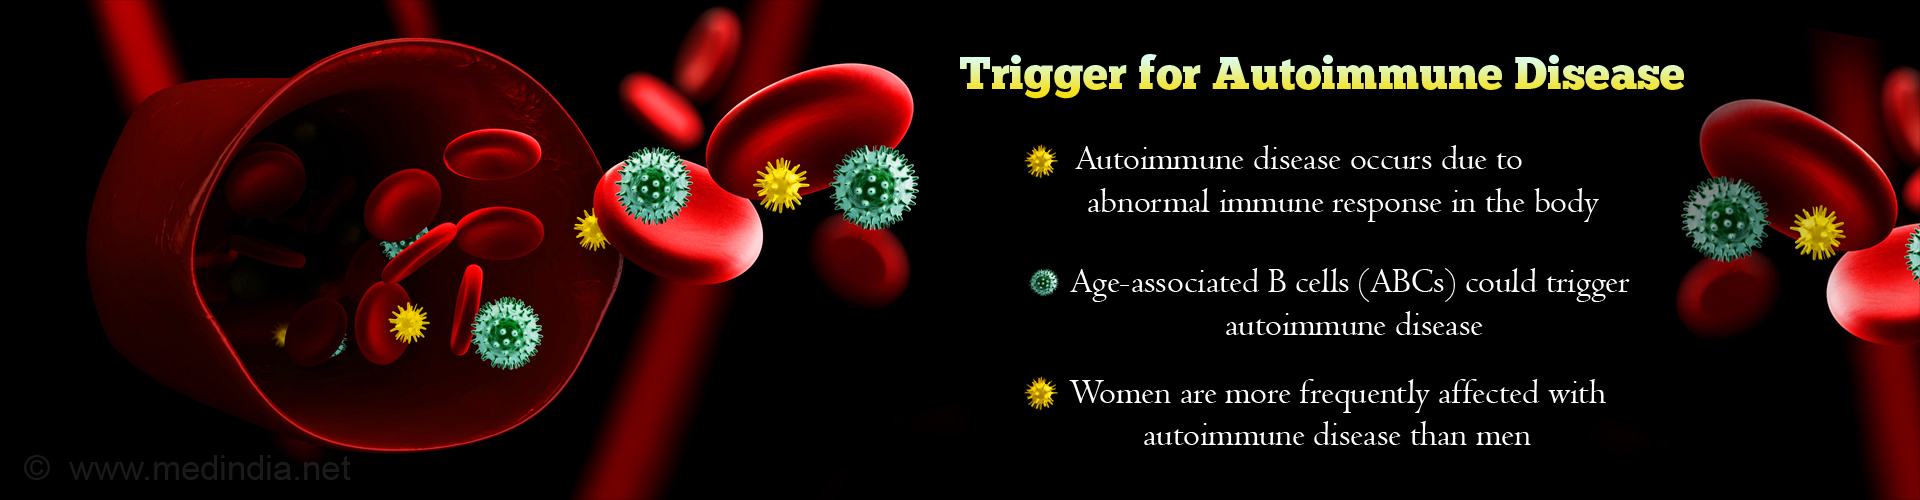 Trigger for Autoimmune Disease
- Autoimmune disease occurs due to abnormal immune response in the body
- Age-related B cells (ABCs) could trigger autoimmune disease
- Women are more frequently affected with autoimmune disease than men